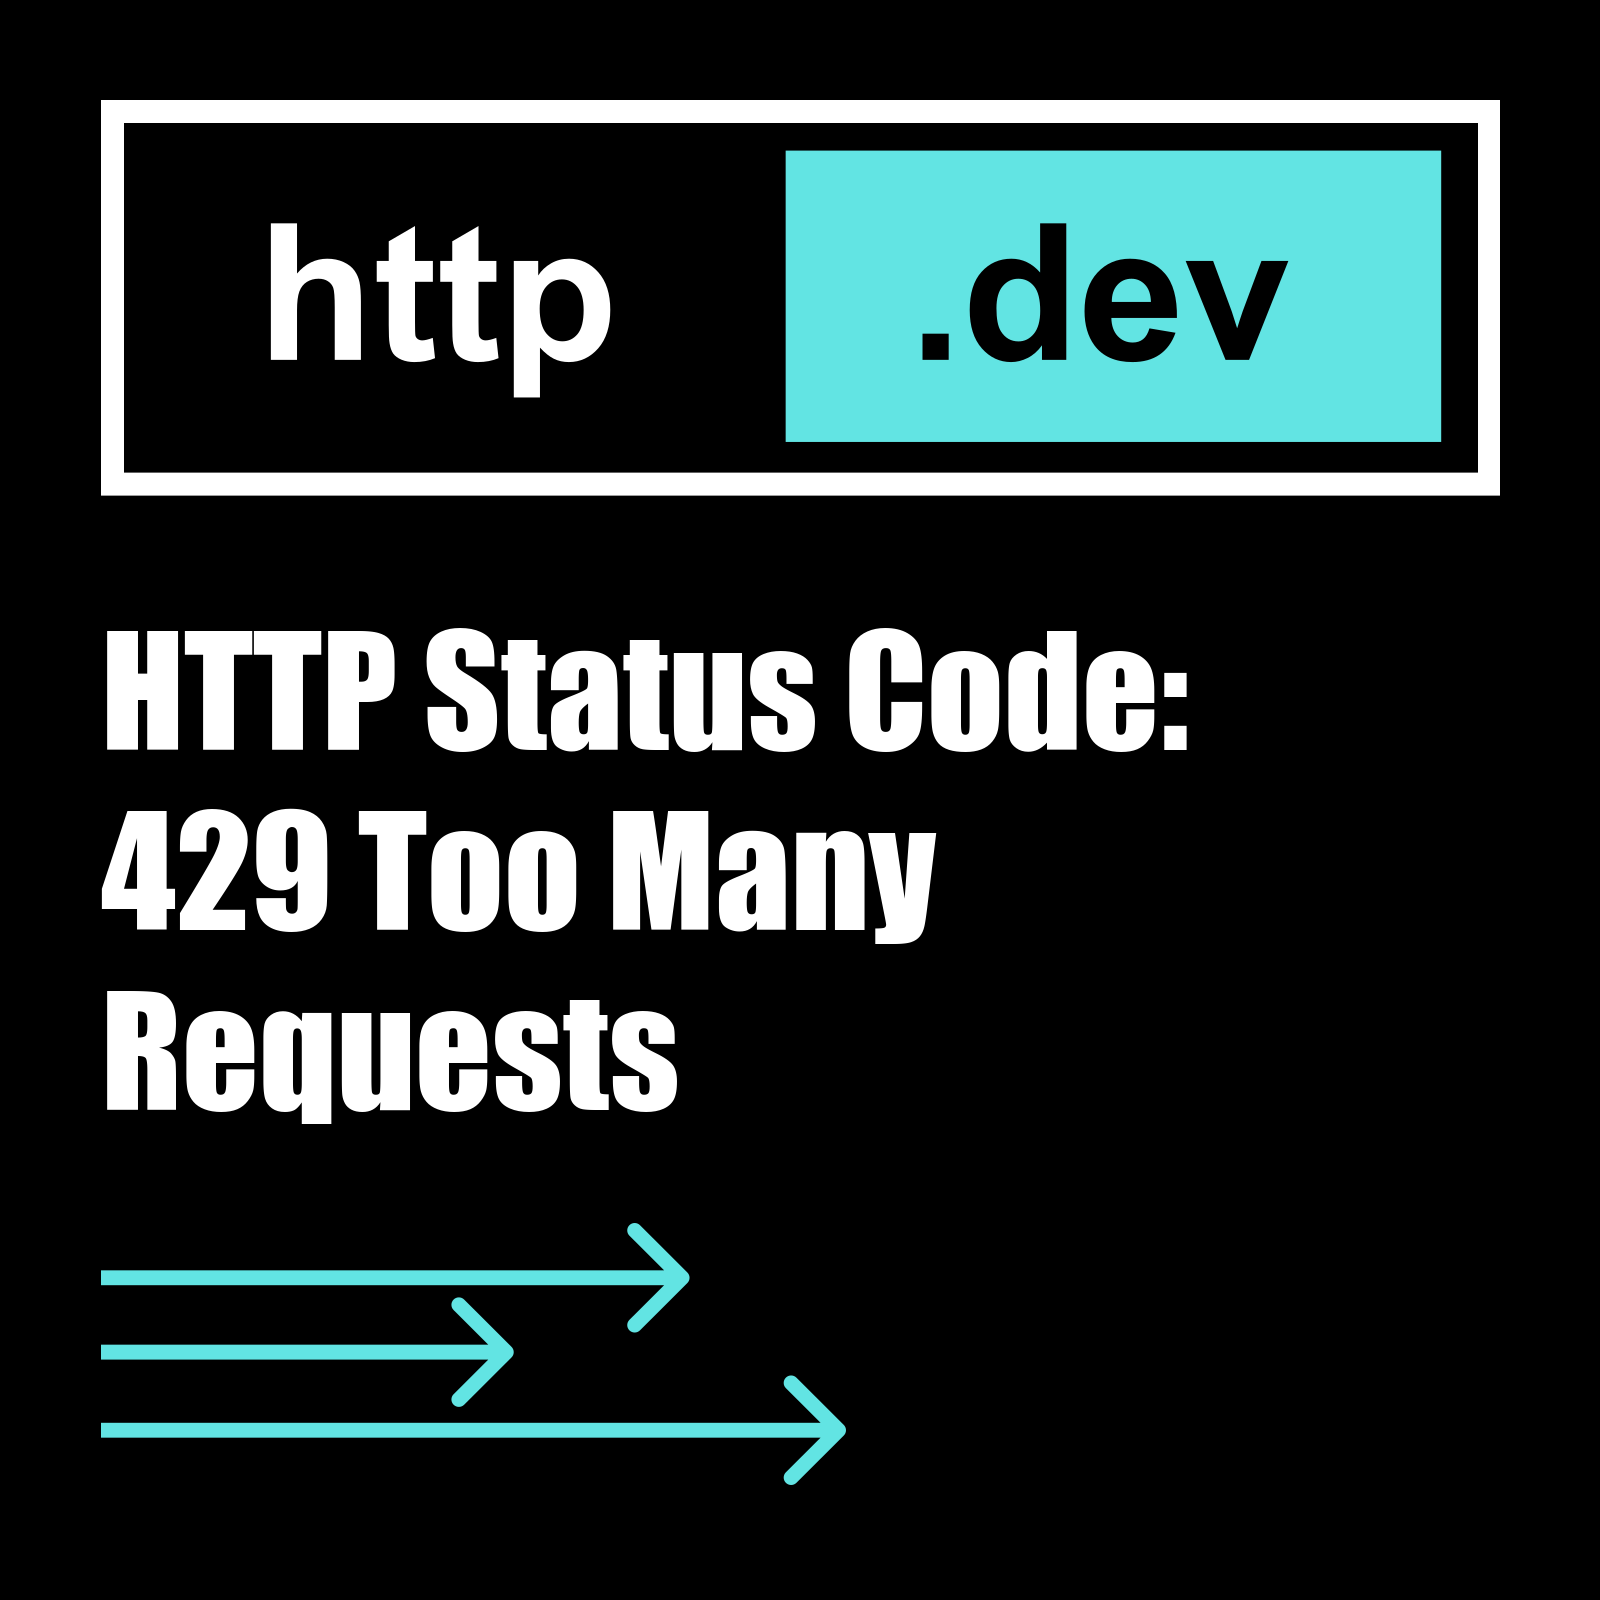 How To Fix Error Code 429 “Too Many Requests”